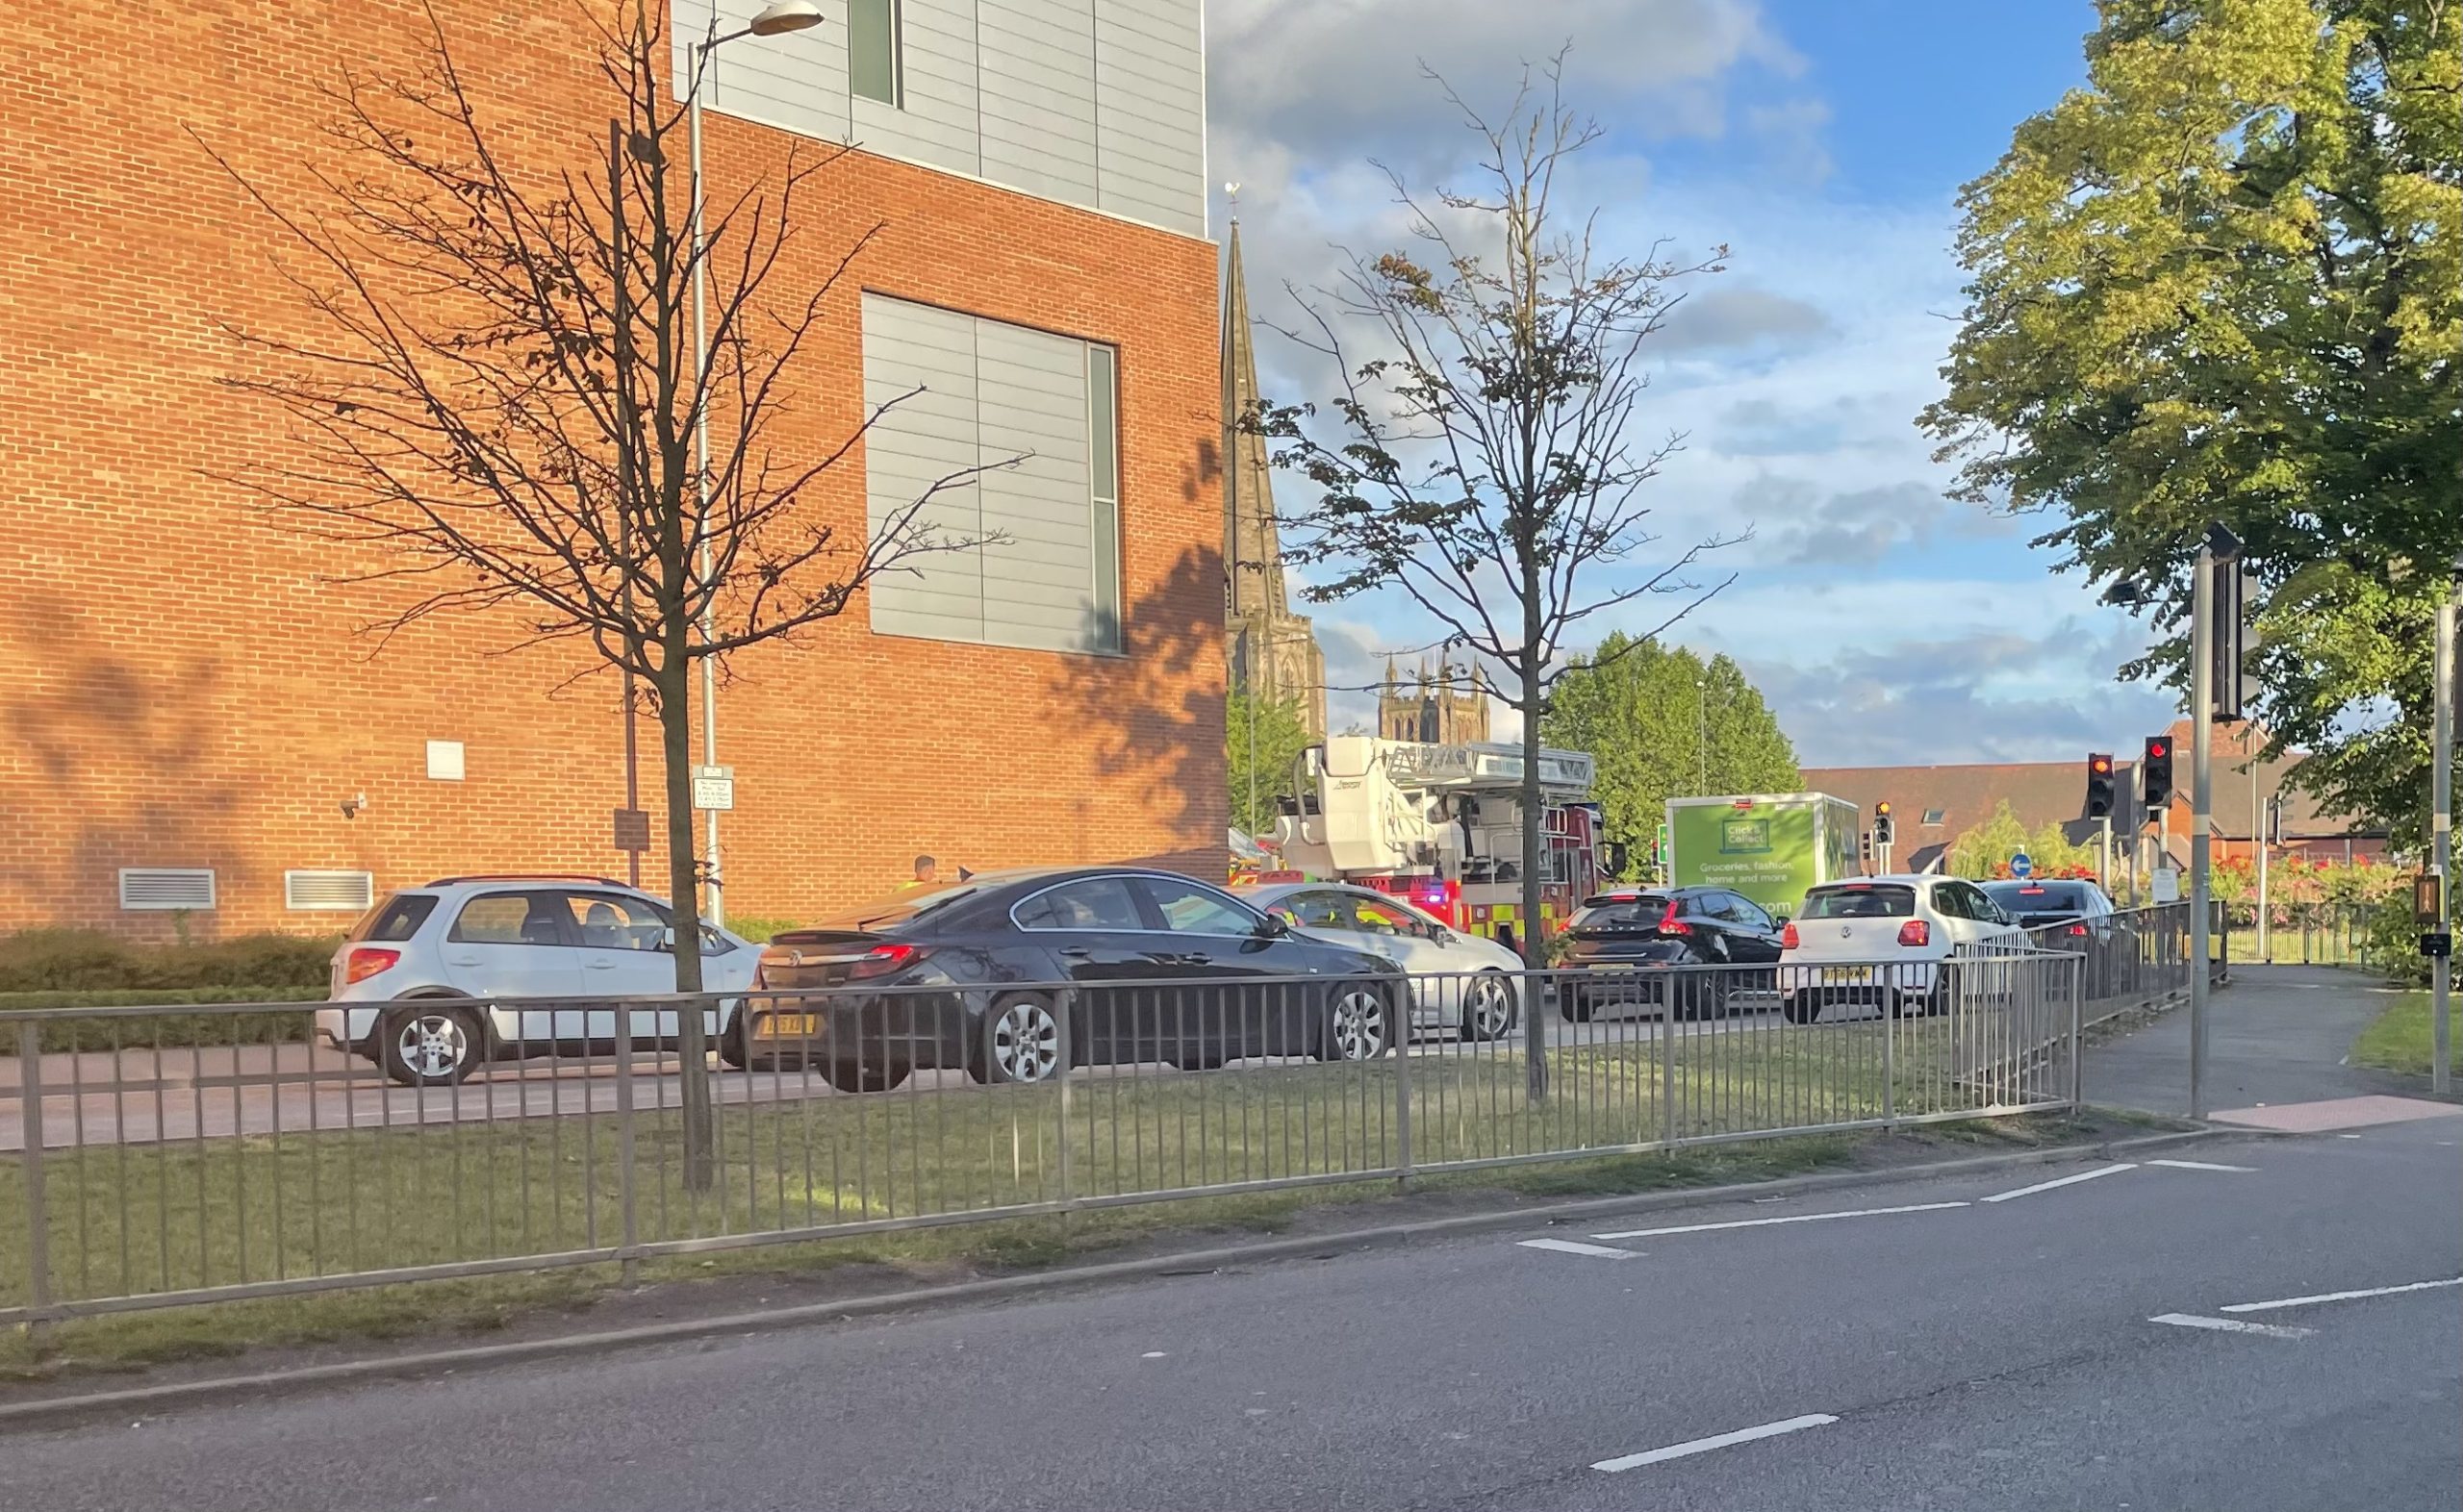 NEWS | ‘AVOID THE AREA’ – Police ask motorists to avoid Debenhams area of Hereford to allow them to deal with an incident